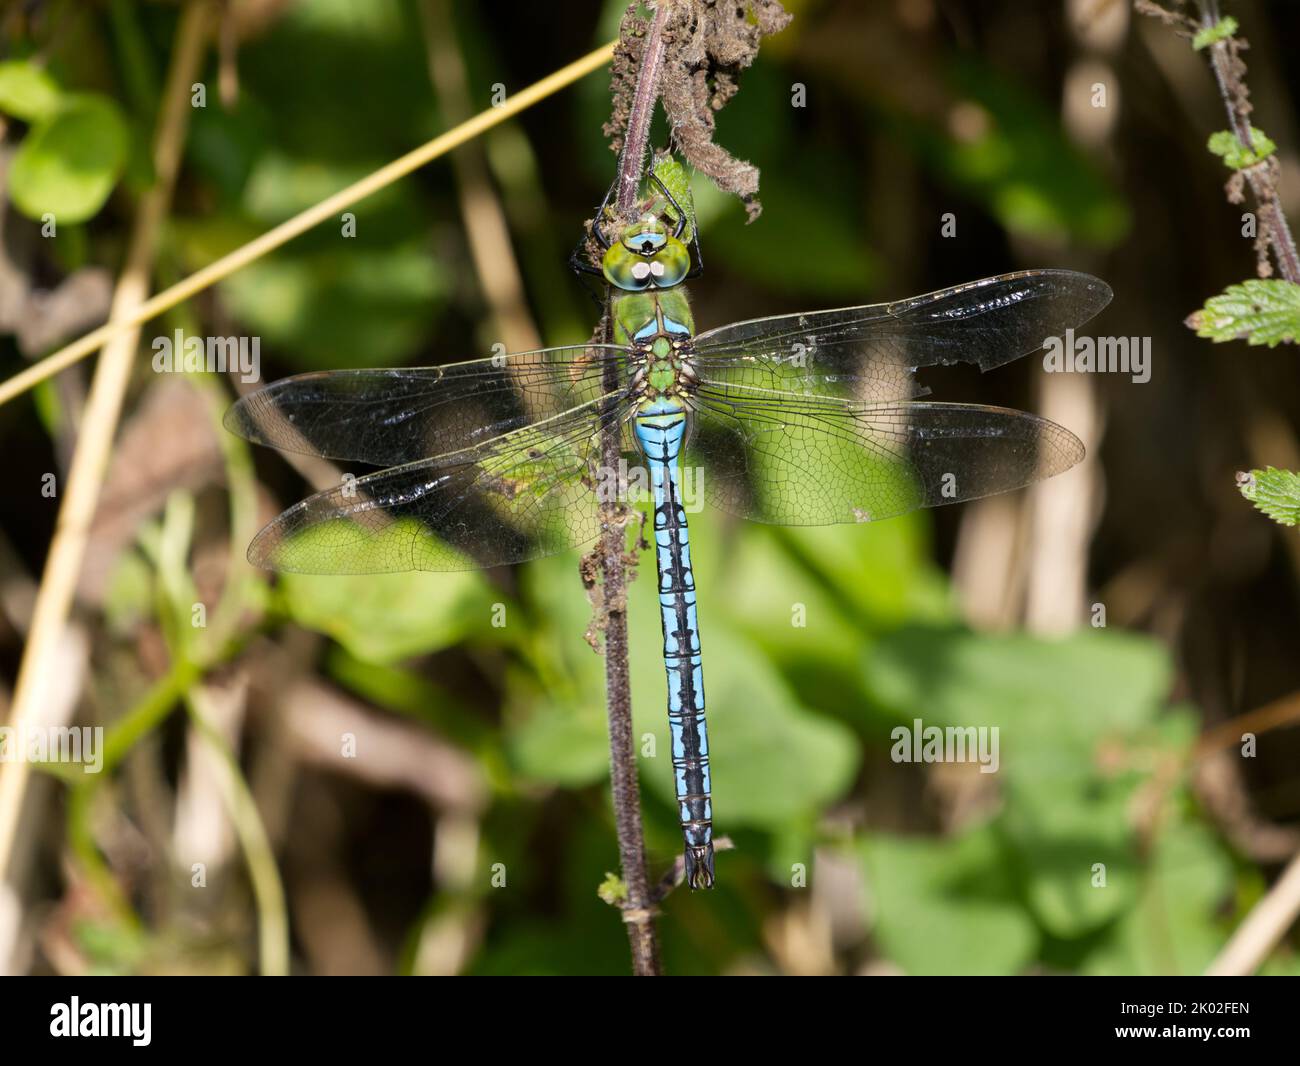 Male Emperor dragonfly (Anax imperator) at rest. Stock Photo